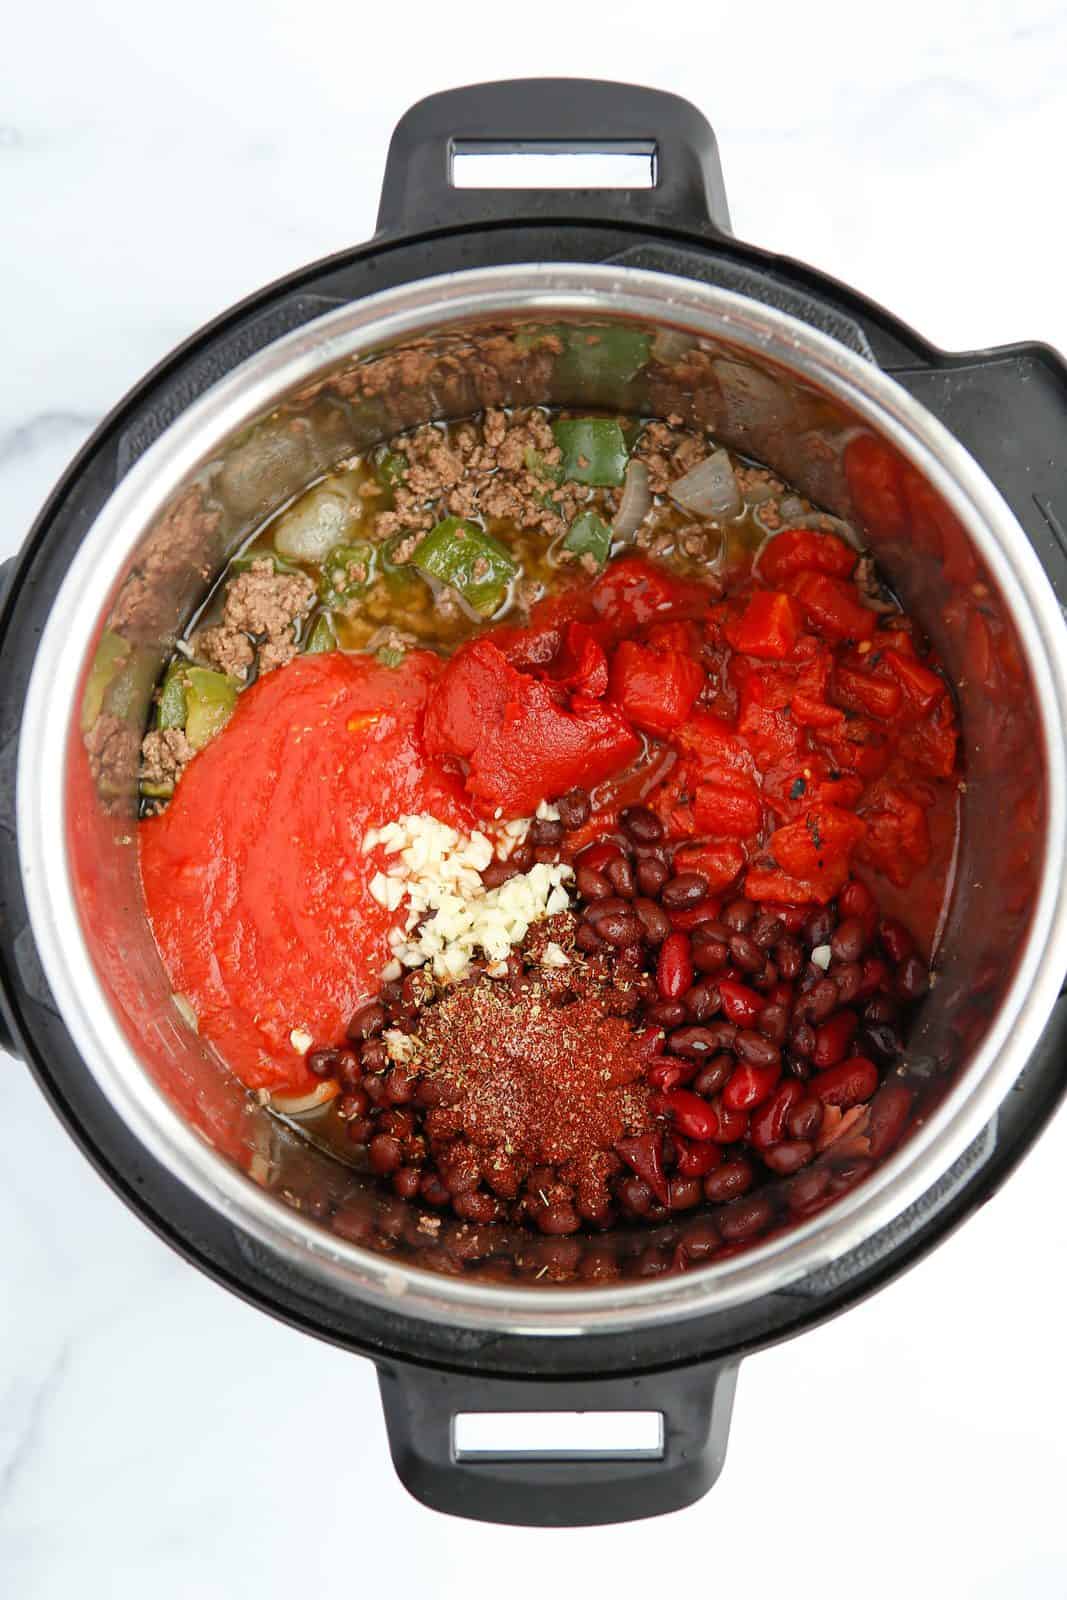 All ingredients in instant pot.